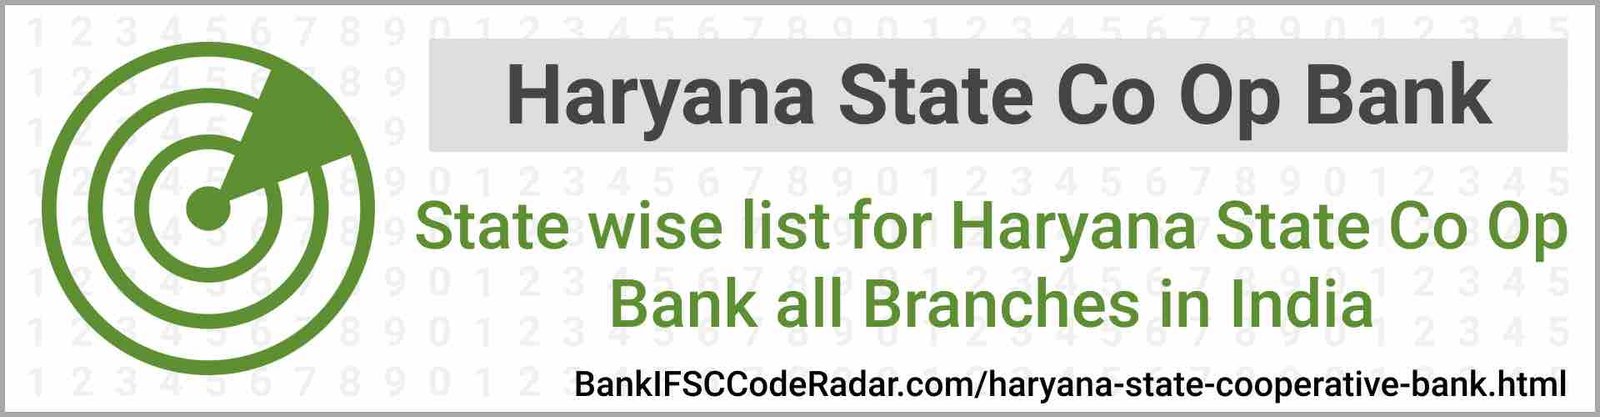 Haryana State Cooperative Bank All Branches India